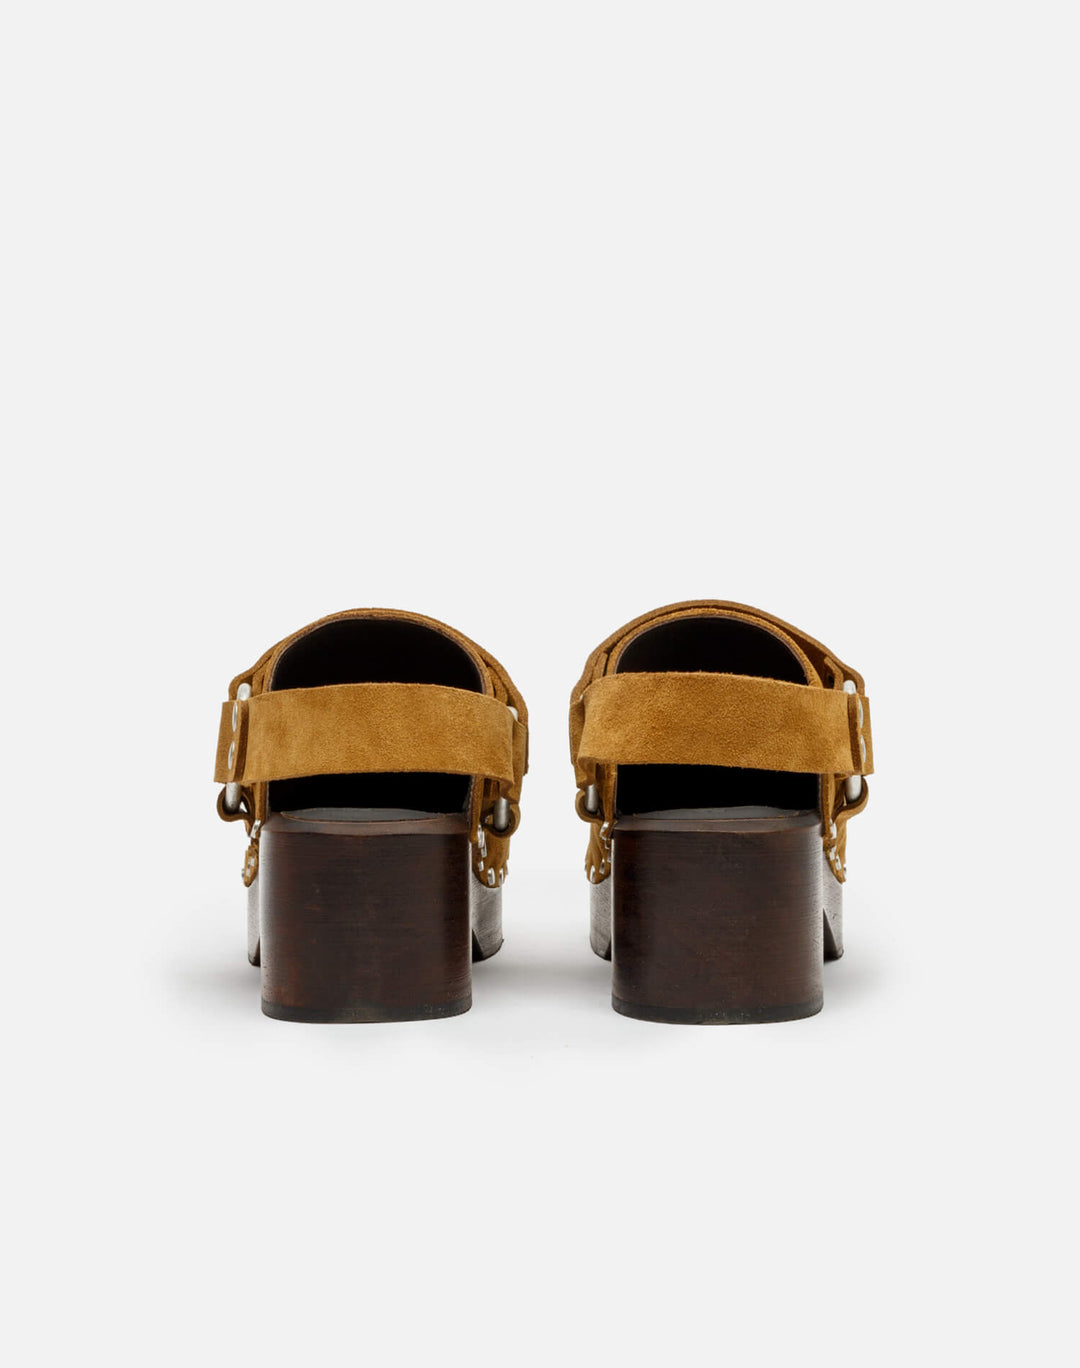 RE/DONE | 70s Studded Slingback Clog - Cuoio Suede